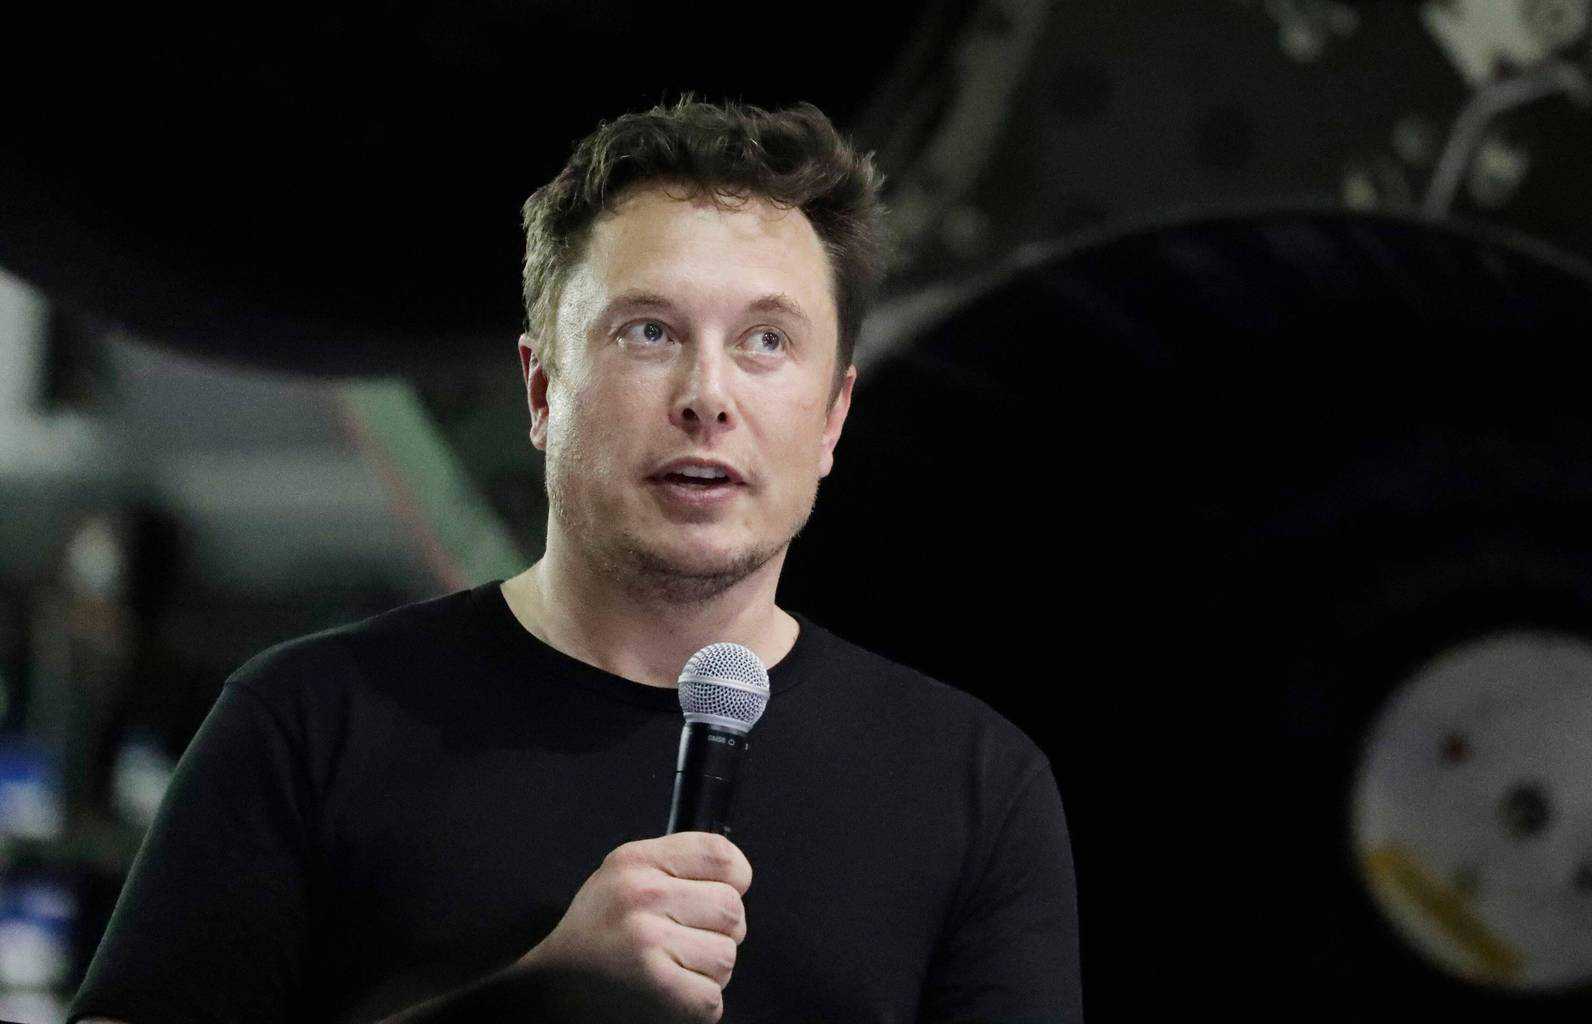 Tesla’s Elon Musk Wants to Put Electrodes in People’s Brains